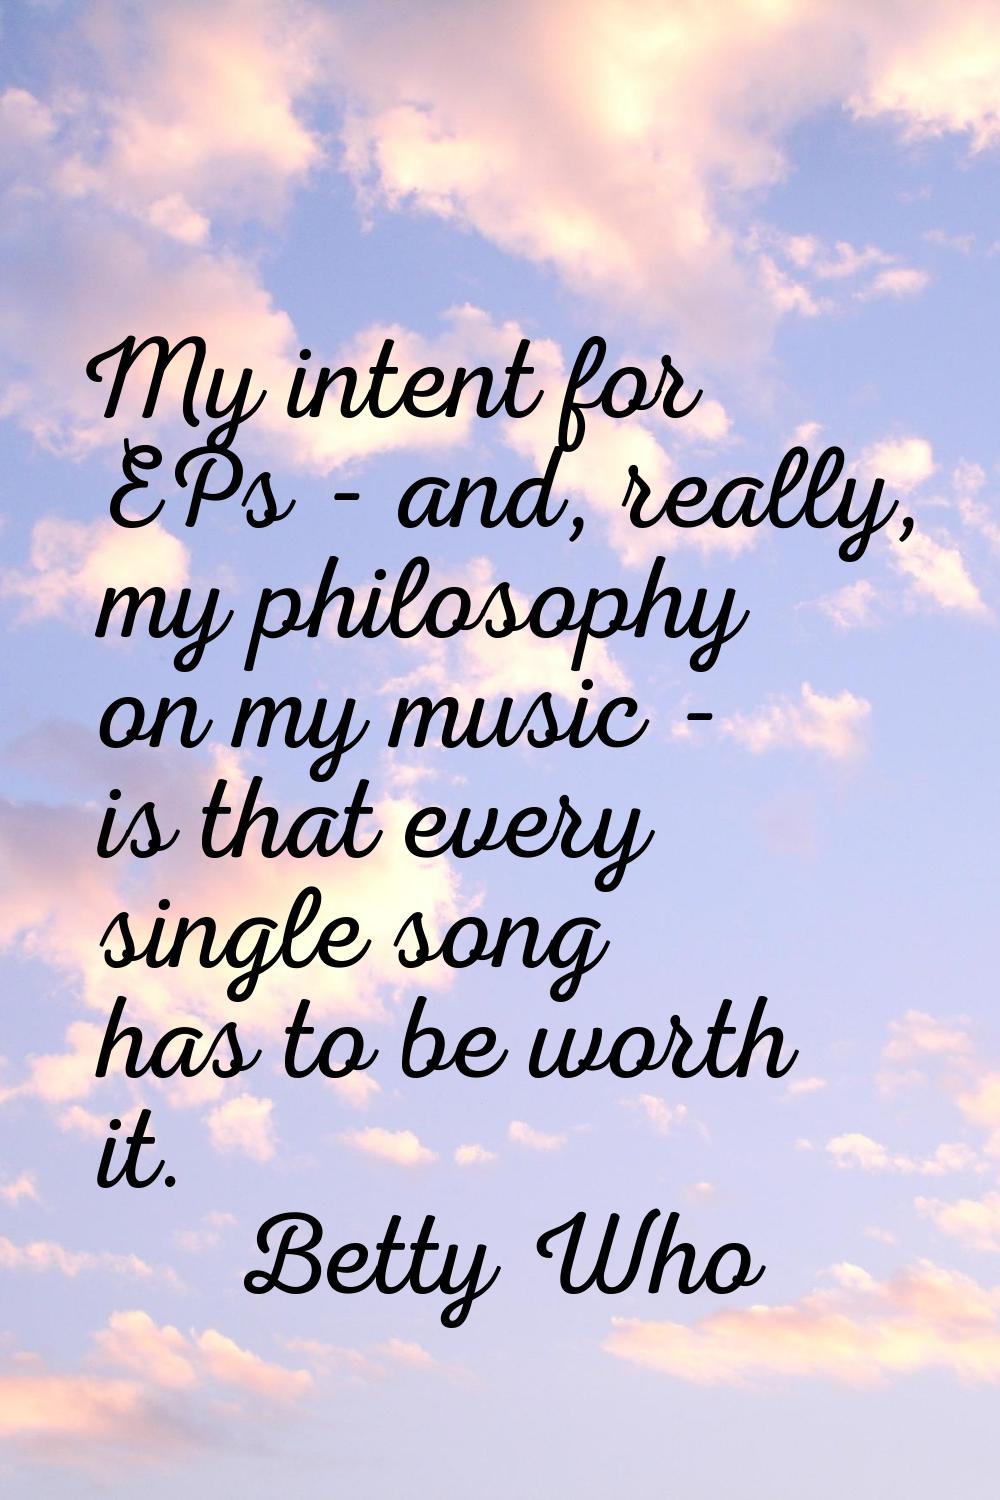 My intent for EPs - and, really, my philosophy on my music - is that every single song has to be wo